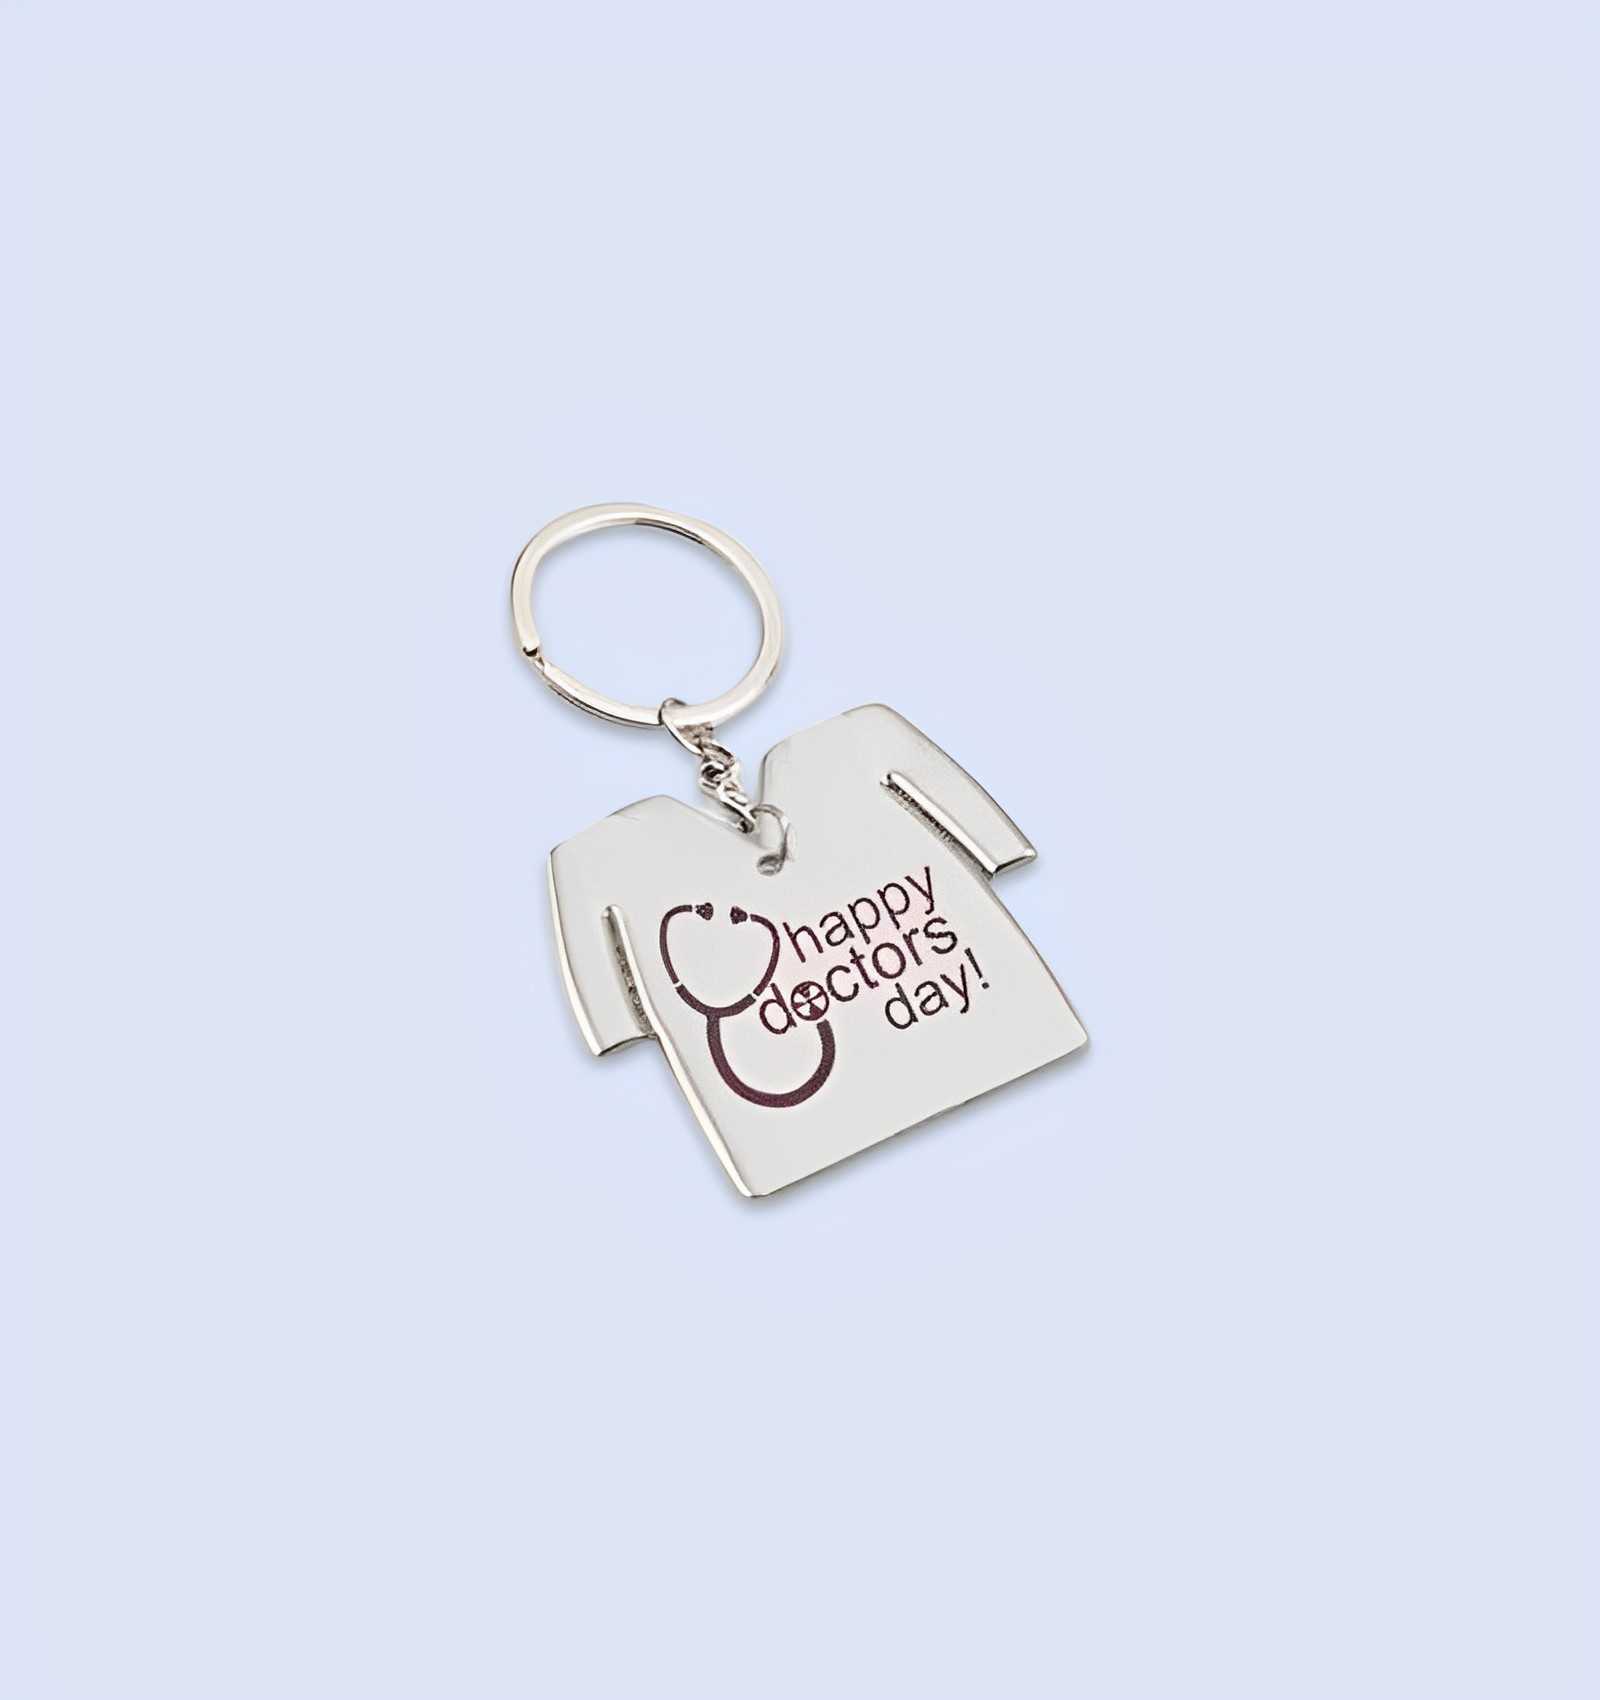 The Perfect Miniature Doctor Coat Keychain